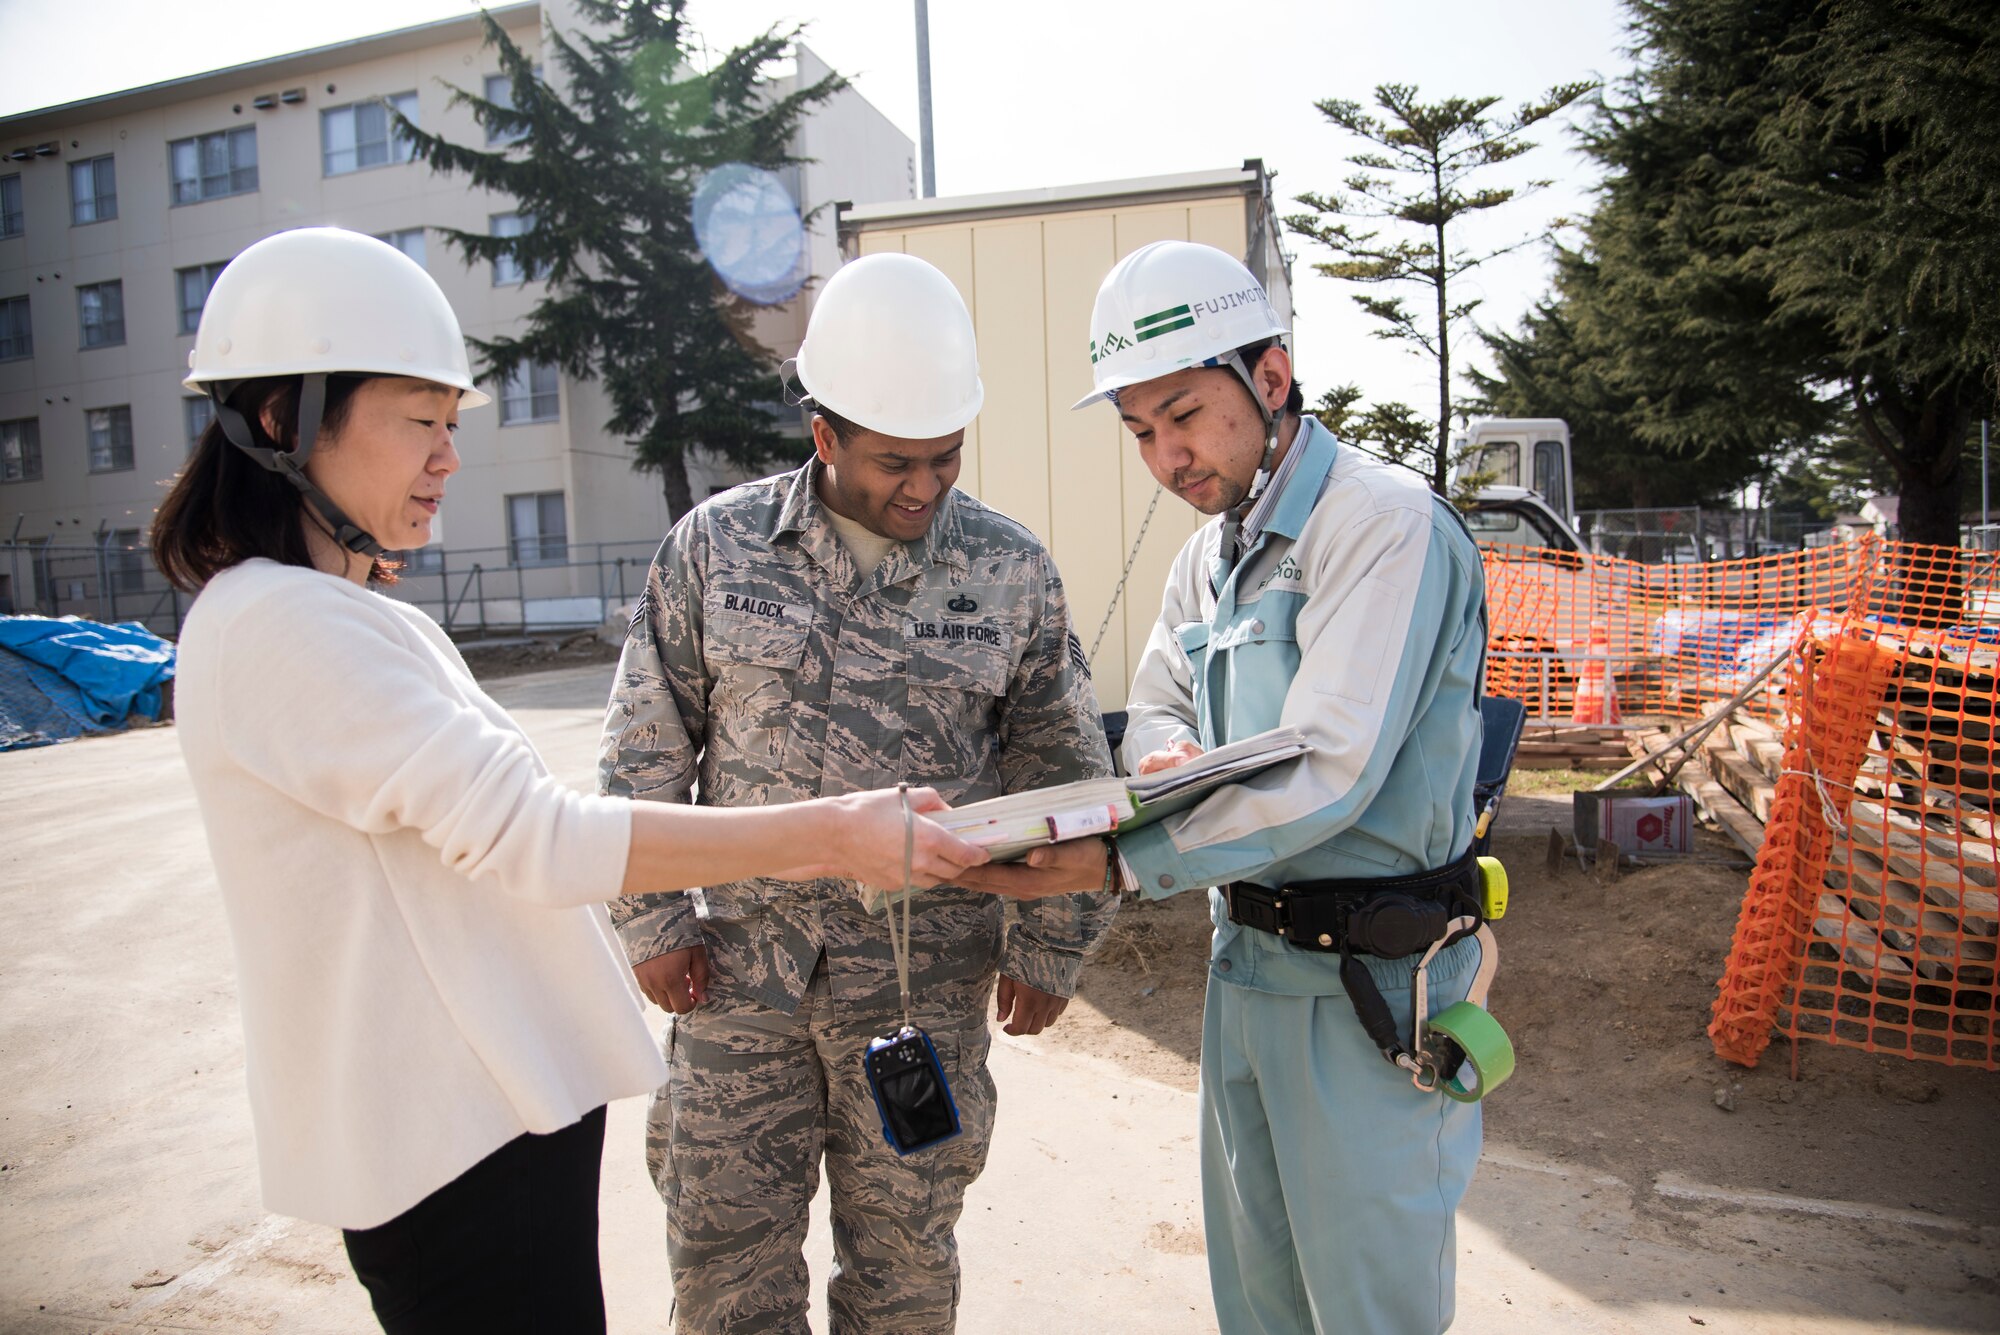 The installation of air conditioning units in main base housing began this year thanks to the efforts of the 35th Contracting Squadron plans and programs flight, also known as P-Flight.